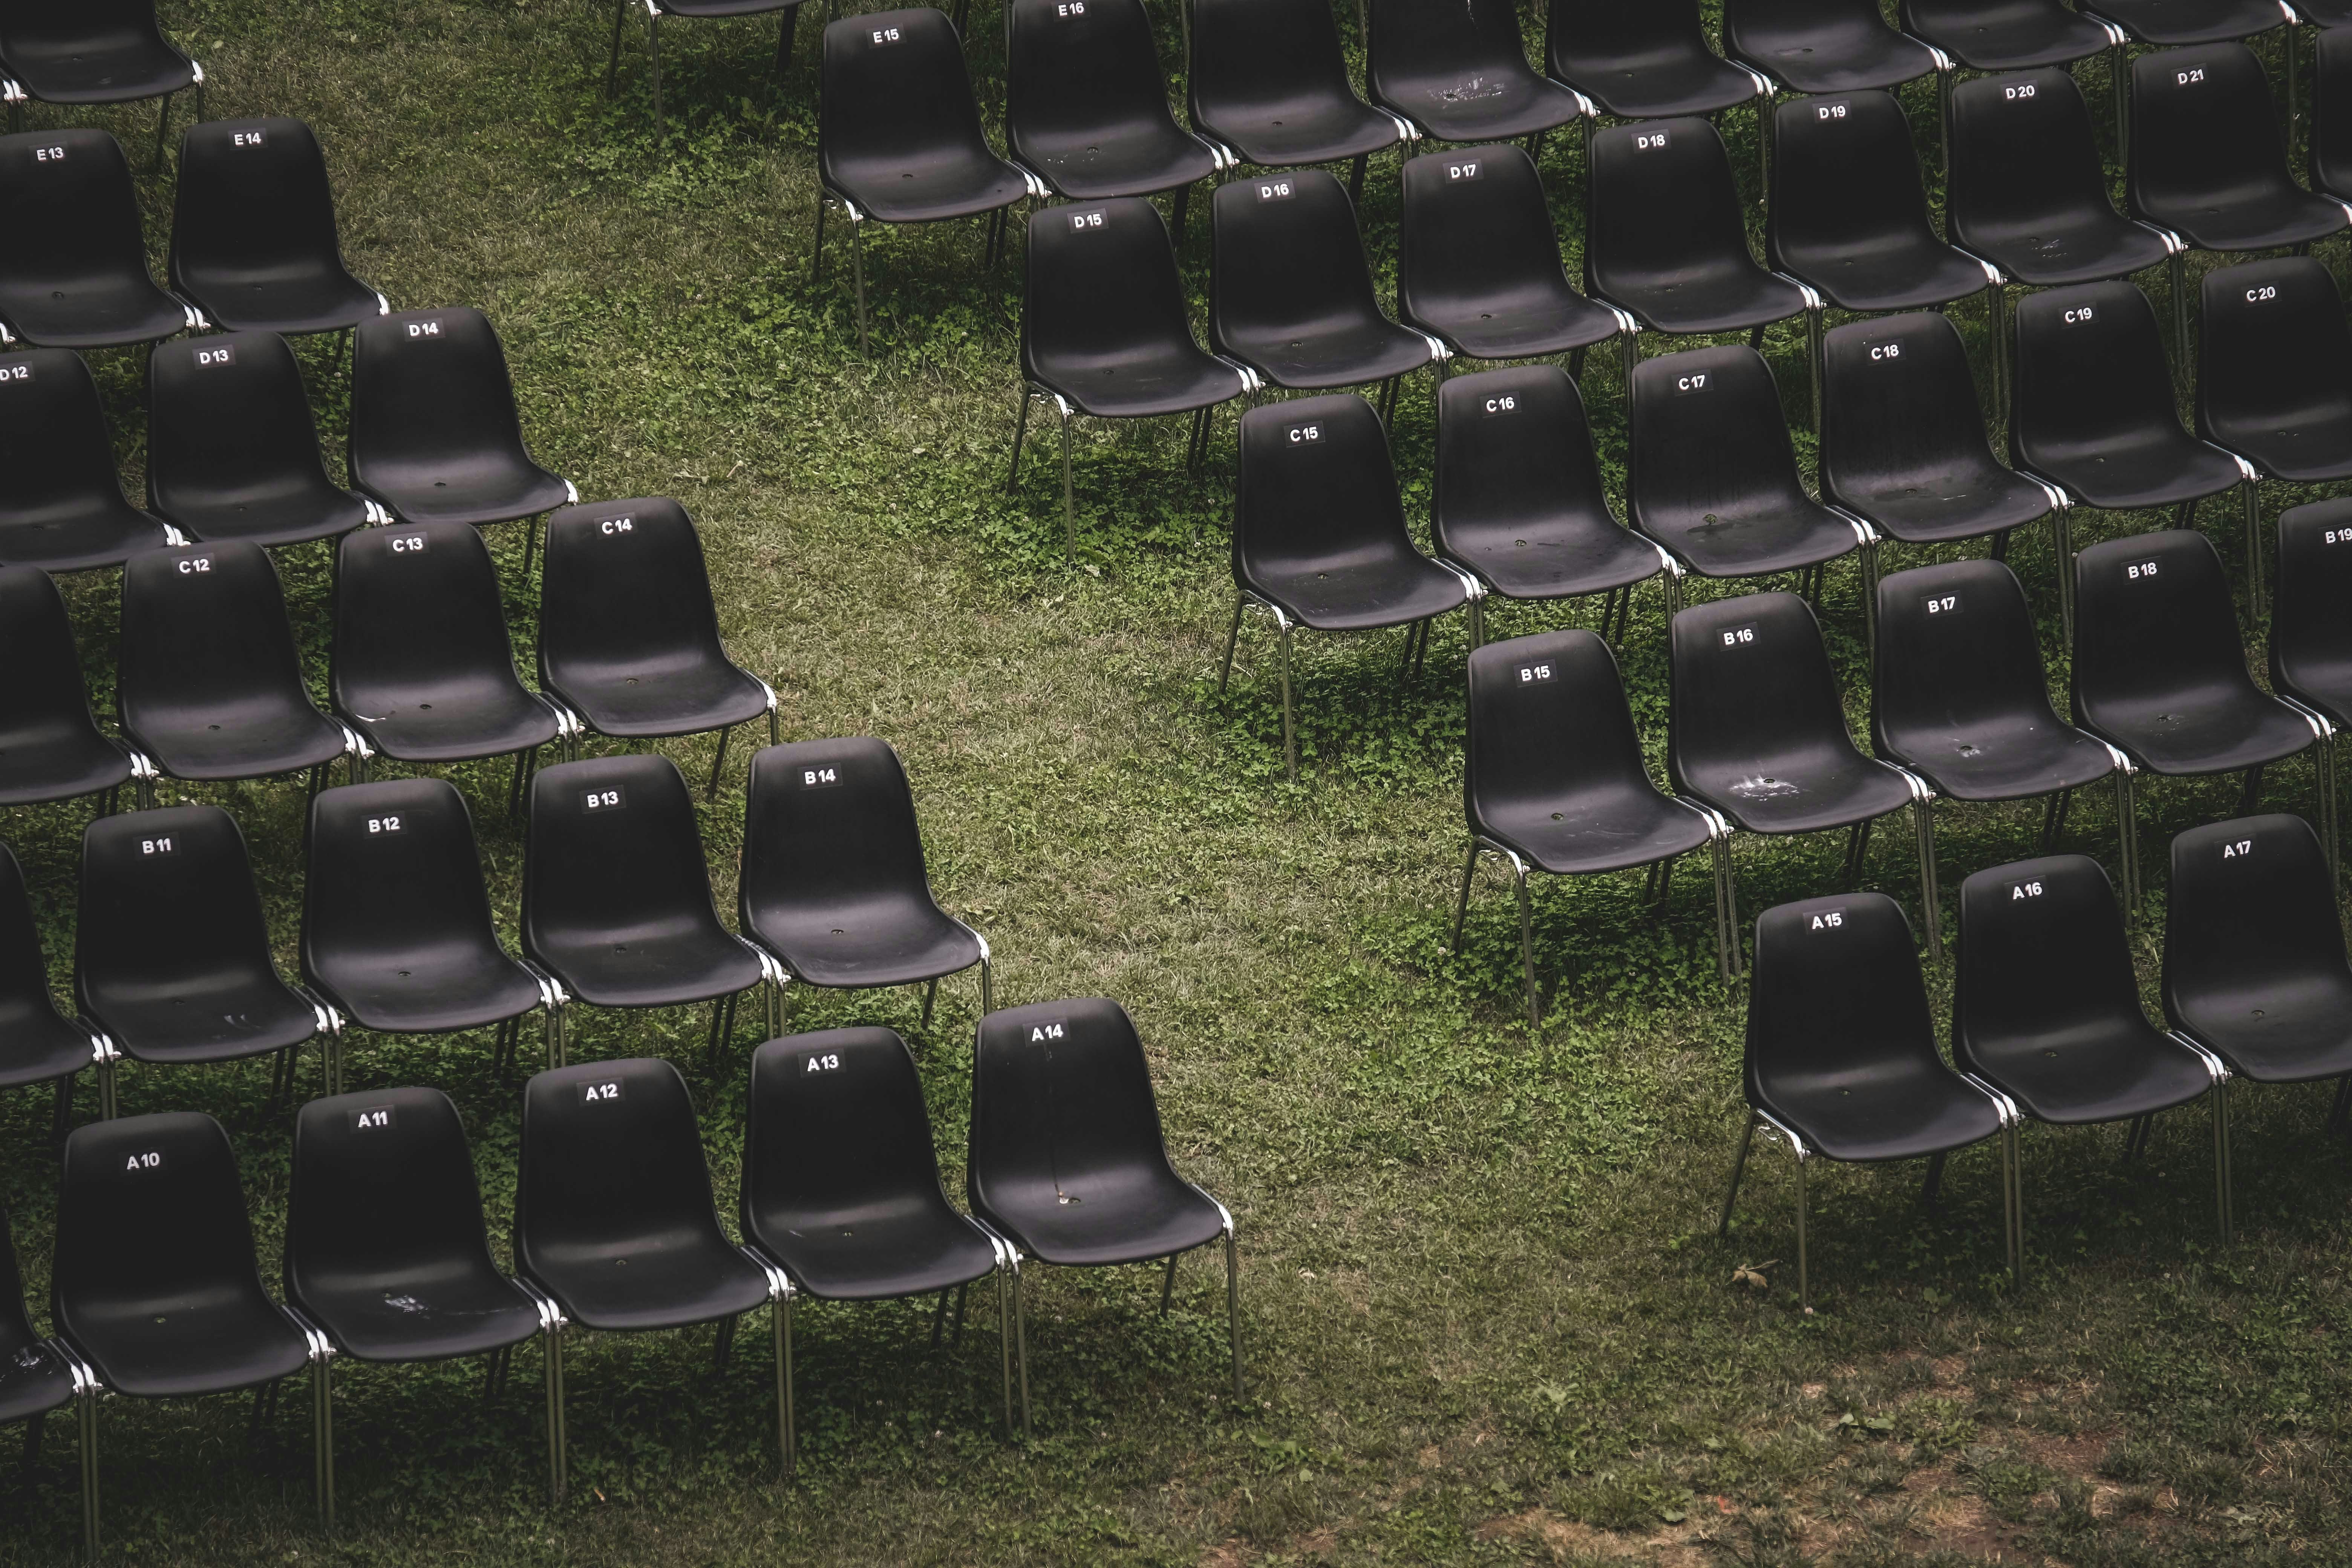 black metal chairs on green grass field during daytime